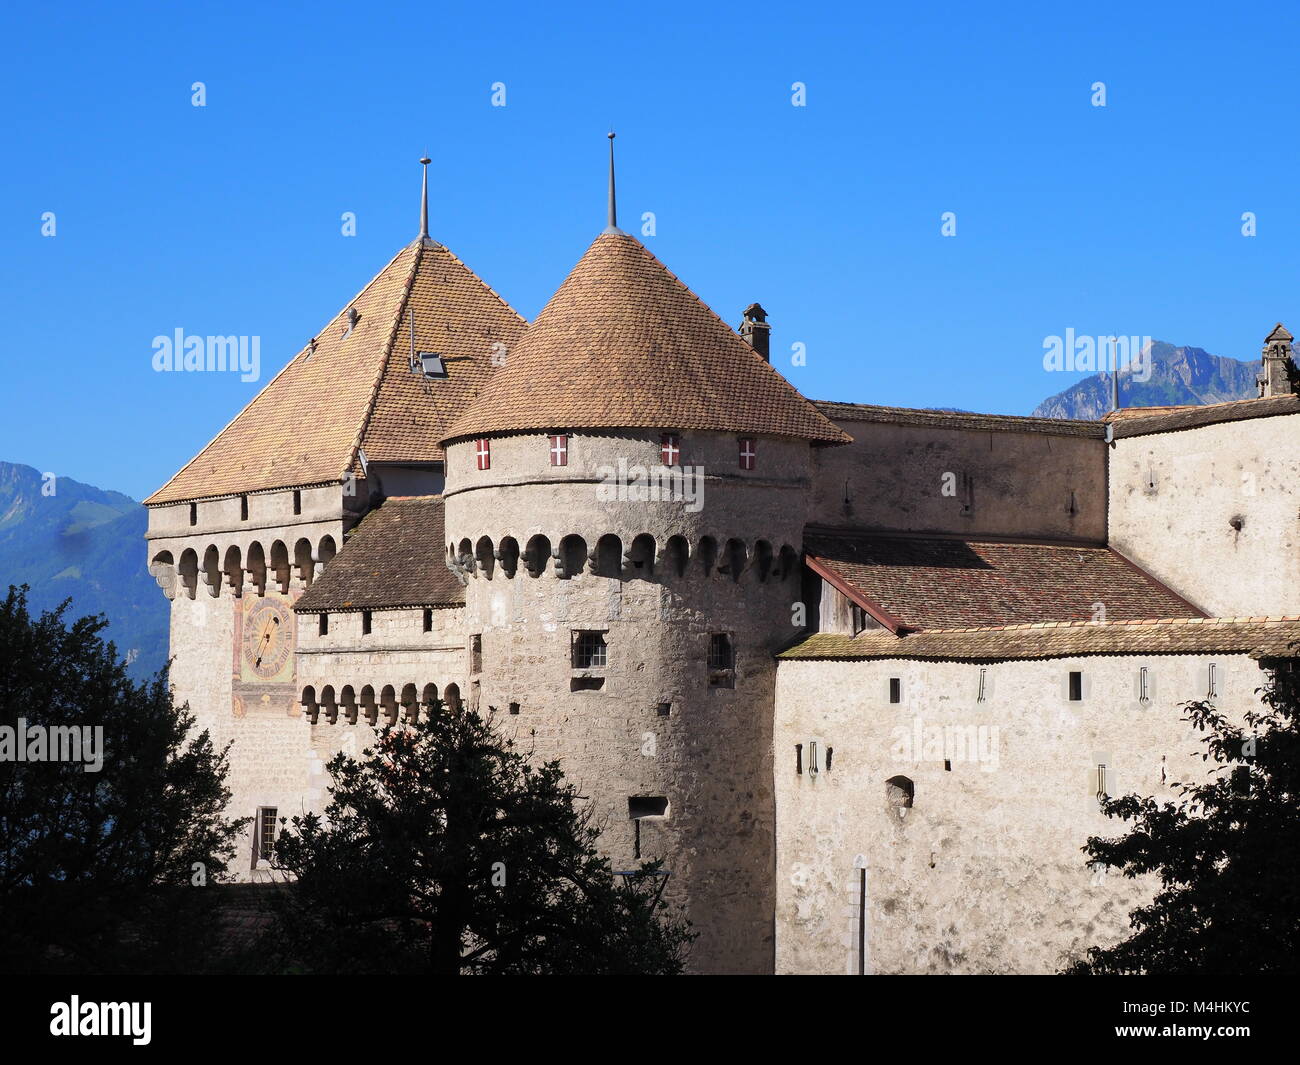 View of stony walls and towers of medieval Chateau de Chillon castle in Switzerland at alpine Lake Geneva in Montreux city, Canton of Vaud, clear blue Stock Photo